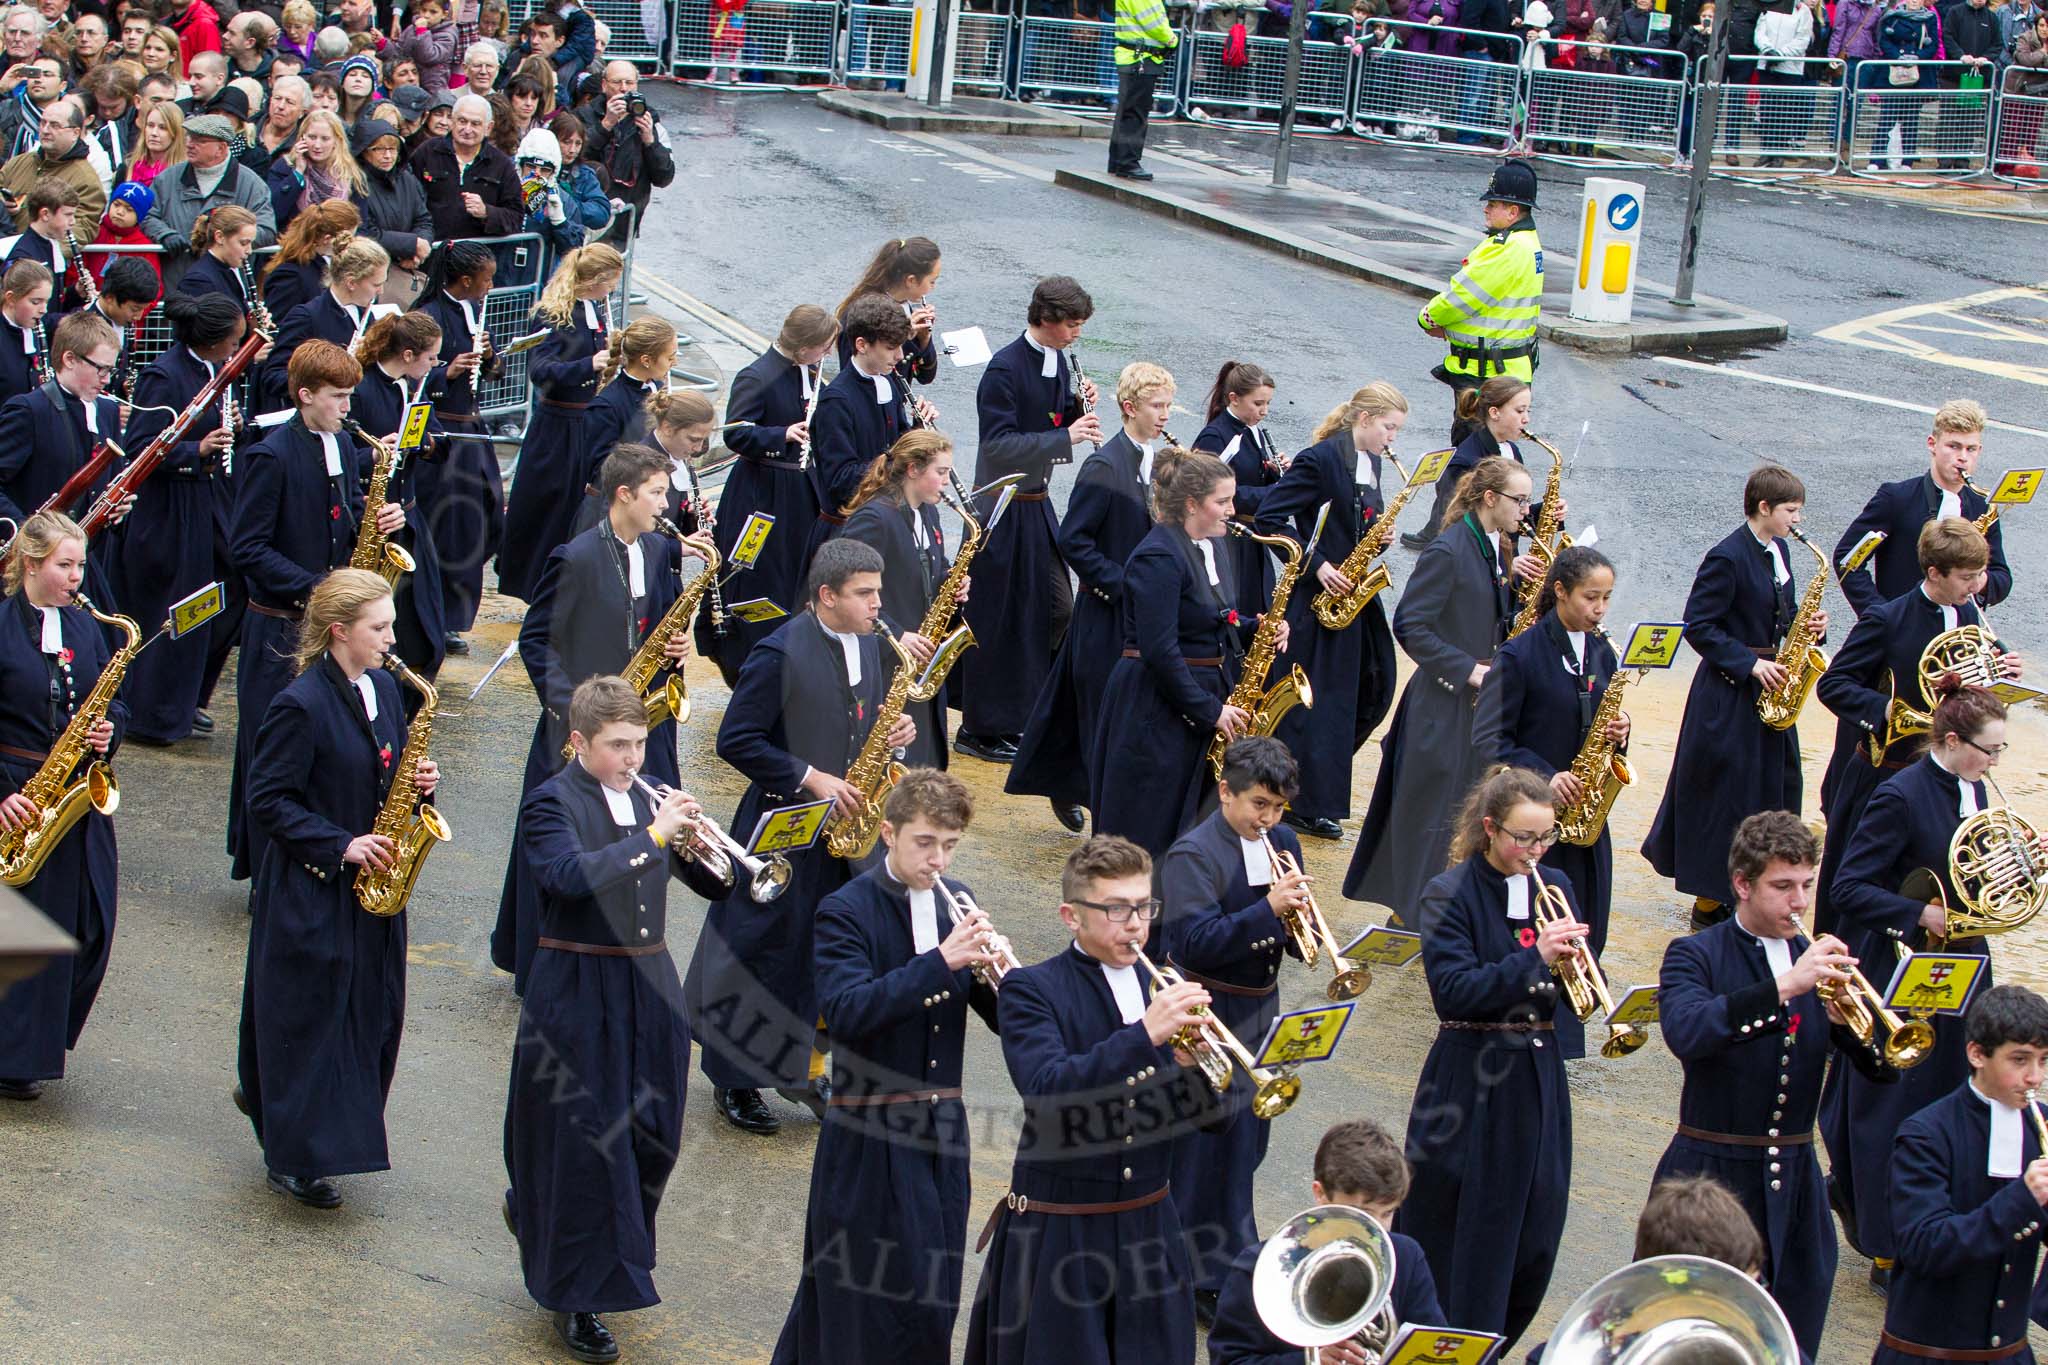 Lord Mayor's Show 2012: Entry 123 - Christ's Hospital School Band..
Press stand opposite Mansion House, City of London,
London,
Greater London,
United Kingdom,
on 10 November 2012 at 12:02, image #1776